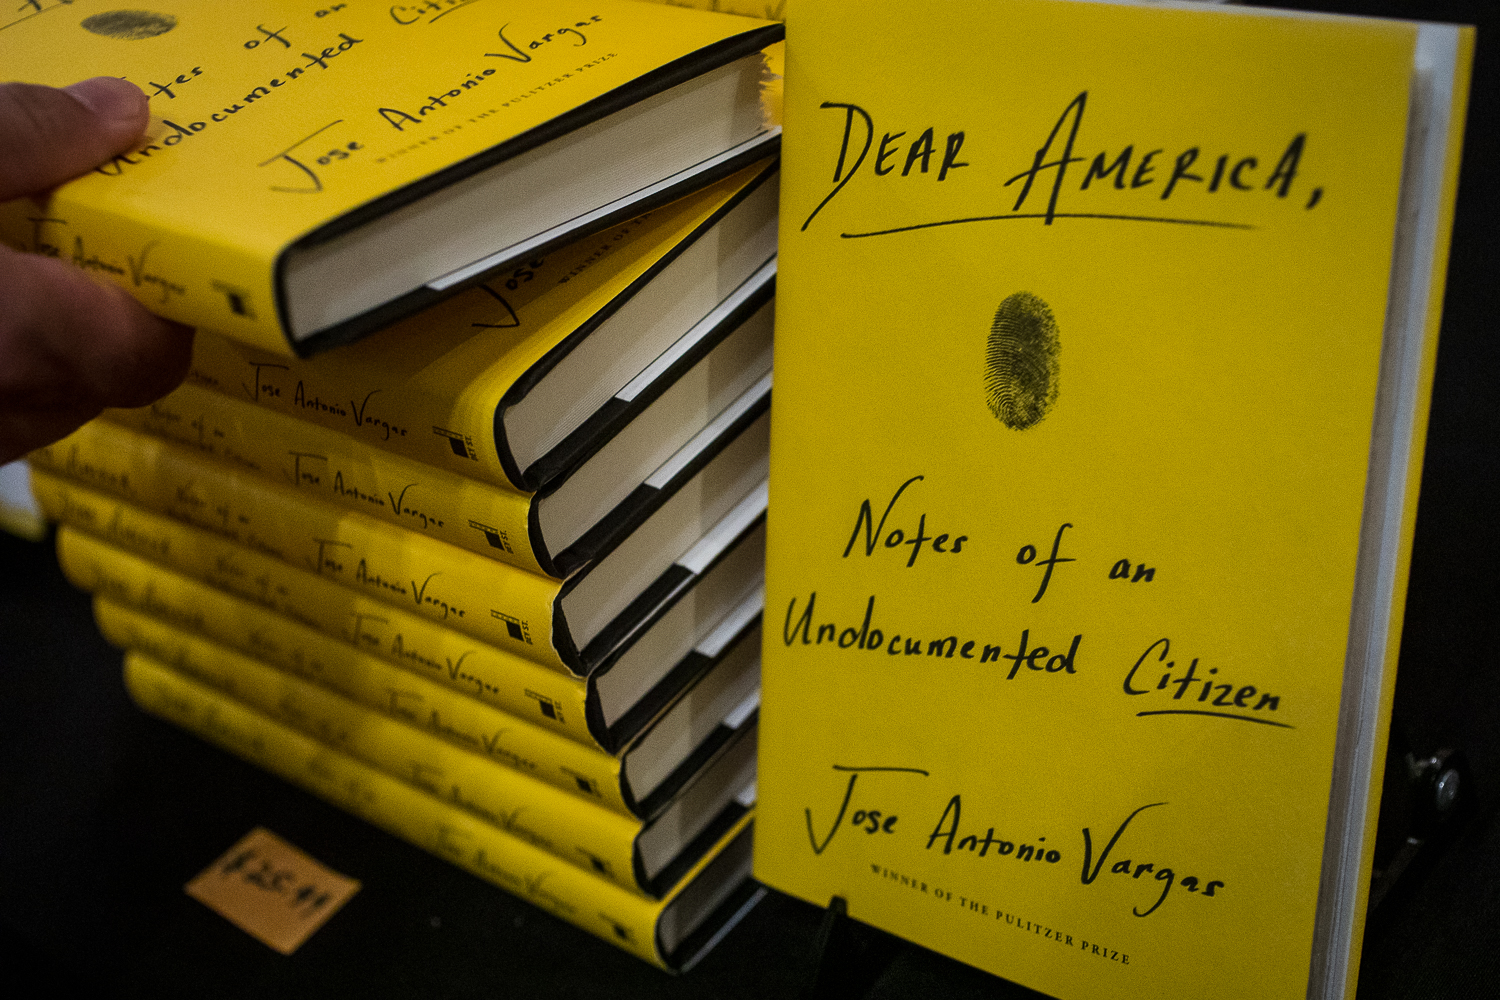 pile of books titled "Dear America, Notes of an Undocumented Citizen"